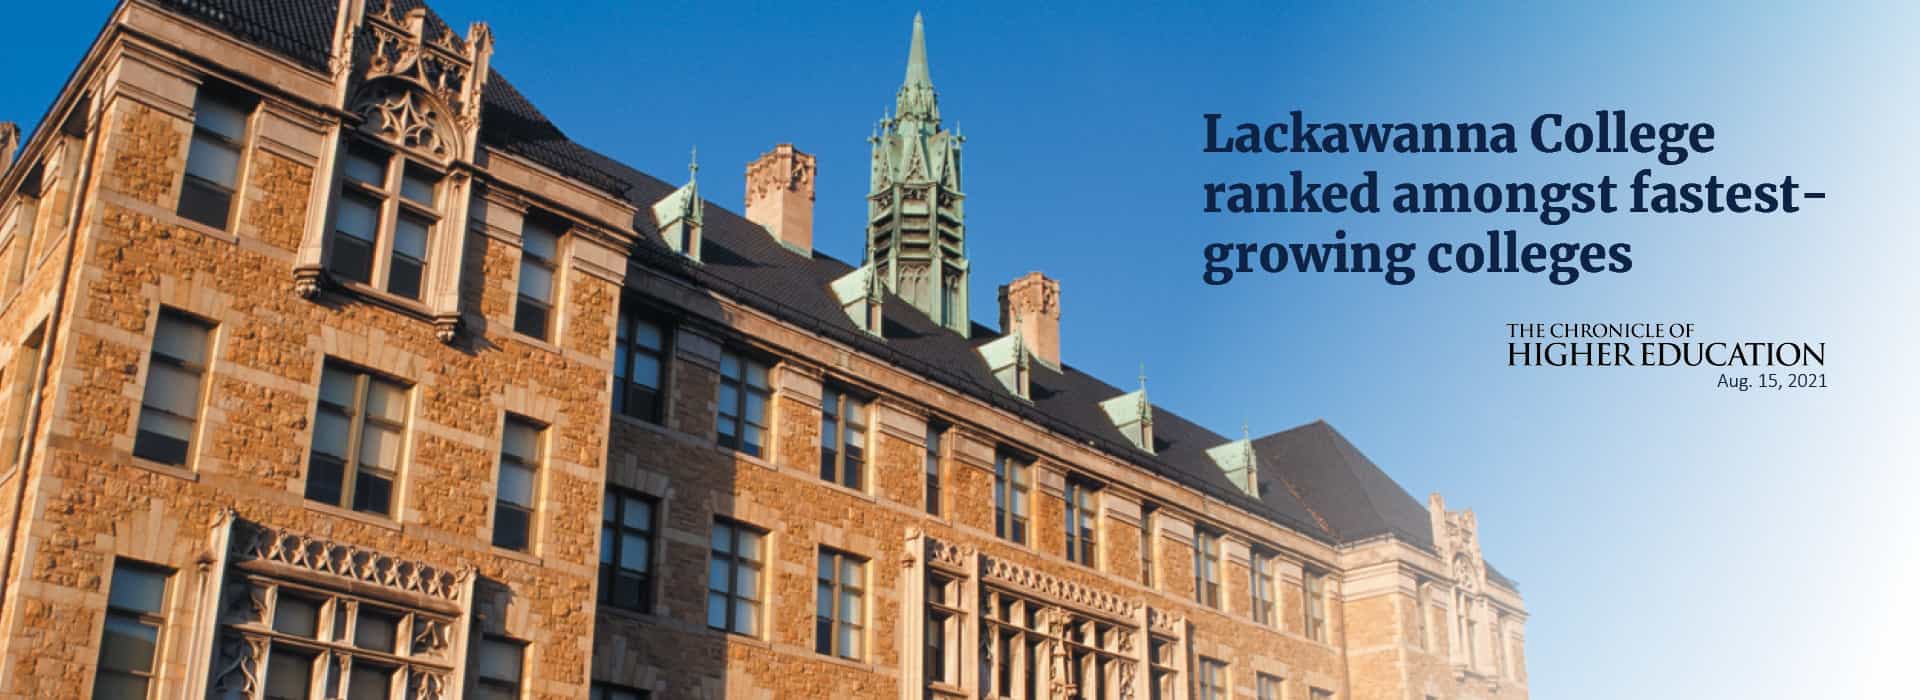 Lackawanna College ranked amongst fastest growing colleges - The Chronicle of Higher Education - Aug. 15, 2021